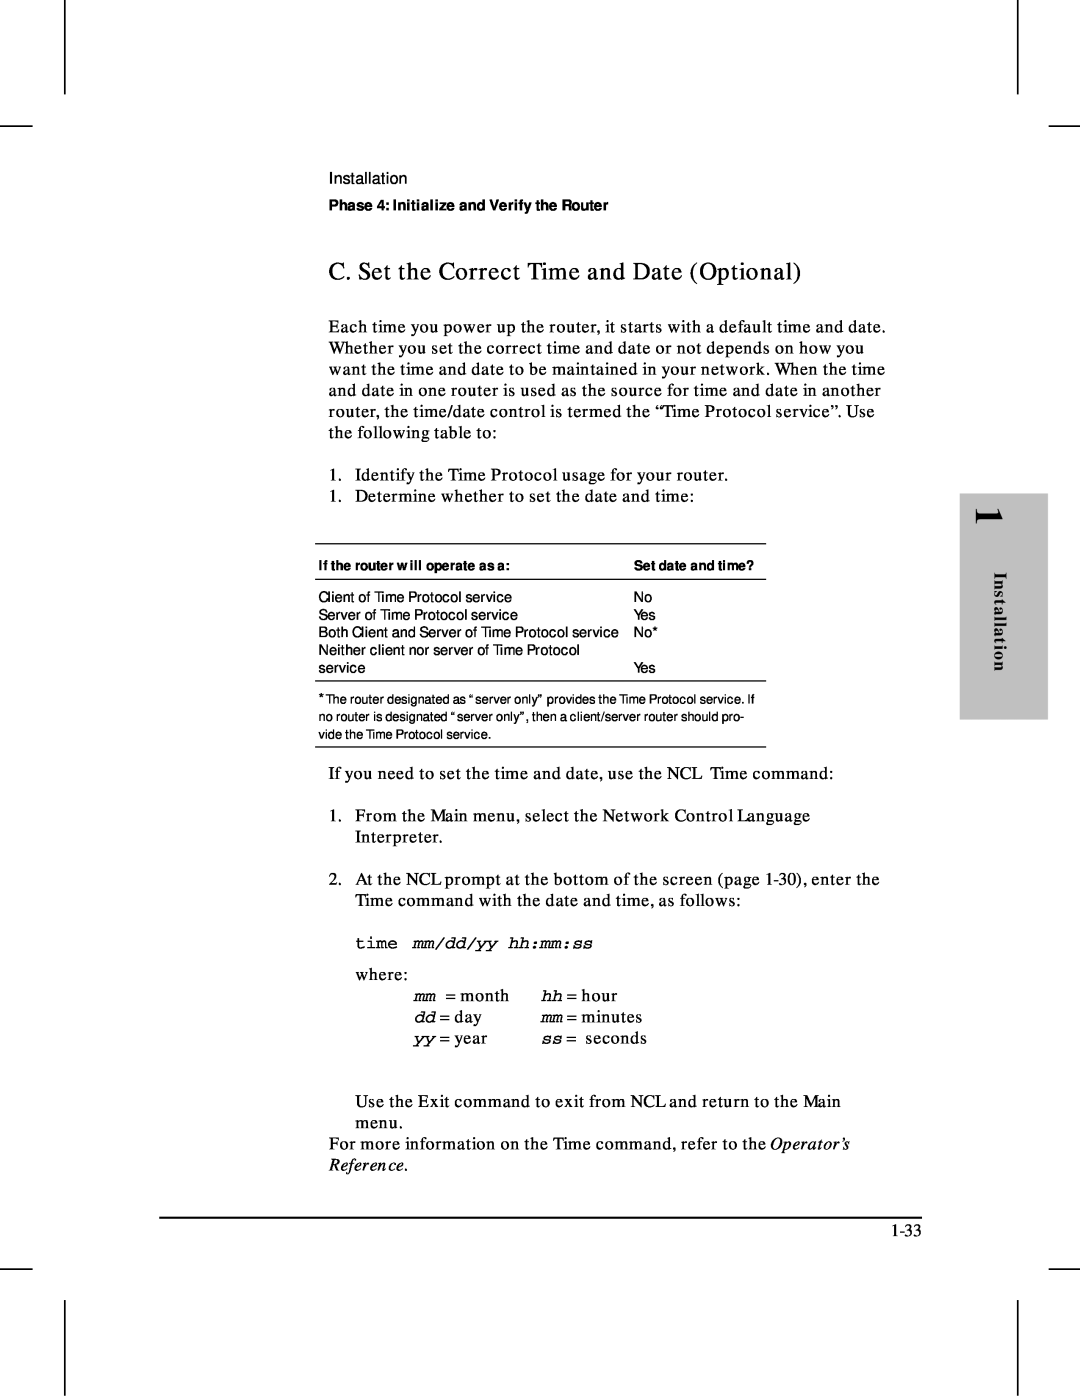 HP 480 manual C. Set the Correct Time and Date Optional, Phase 4 Initialize and Verify the Router, time mm/dd/yy hhmmss 